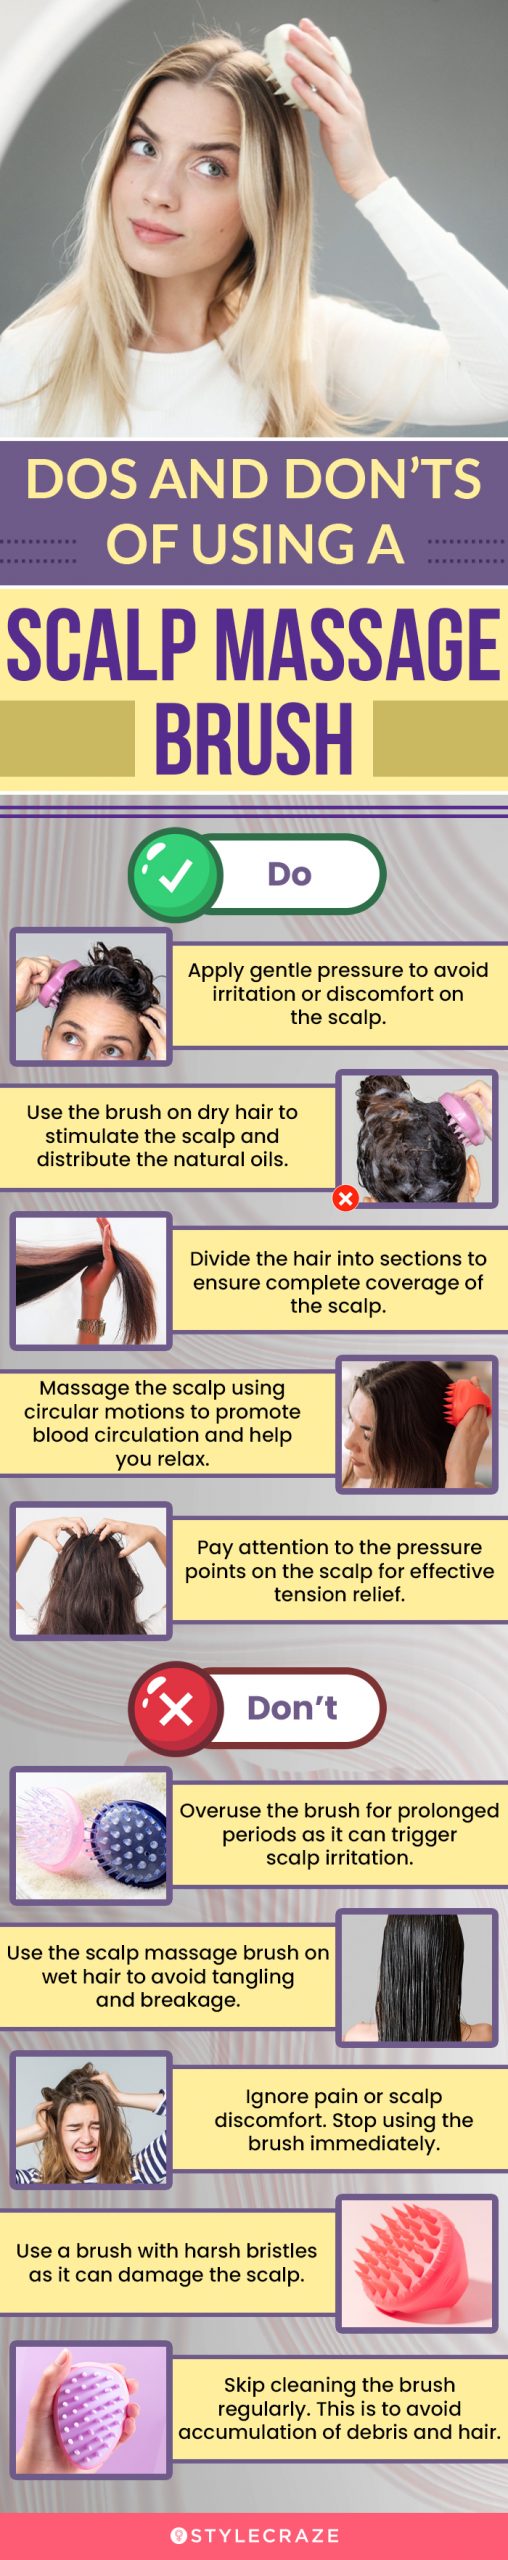 Dos And Don’ts While Using Scalp Massage Brushes(infographic)